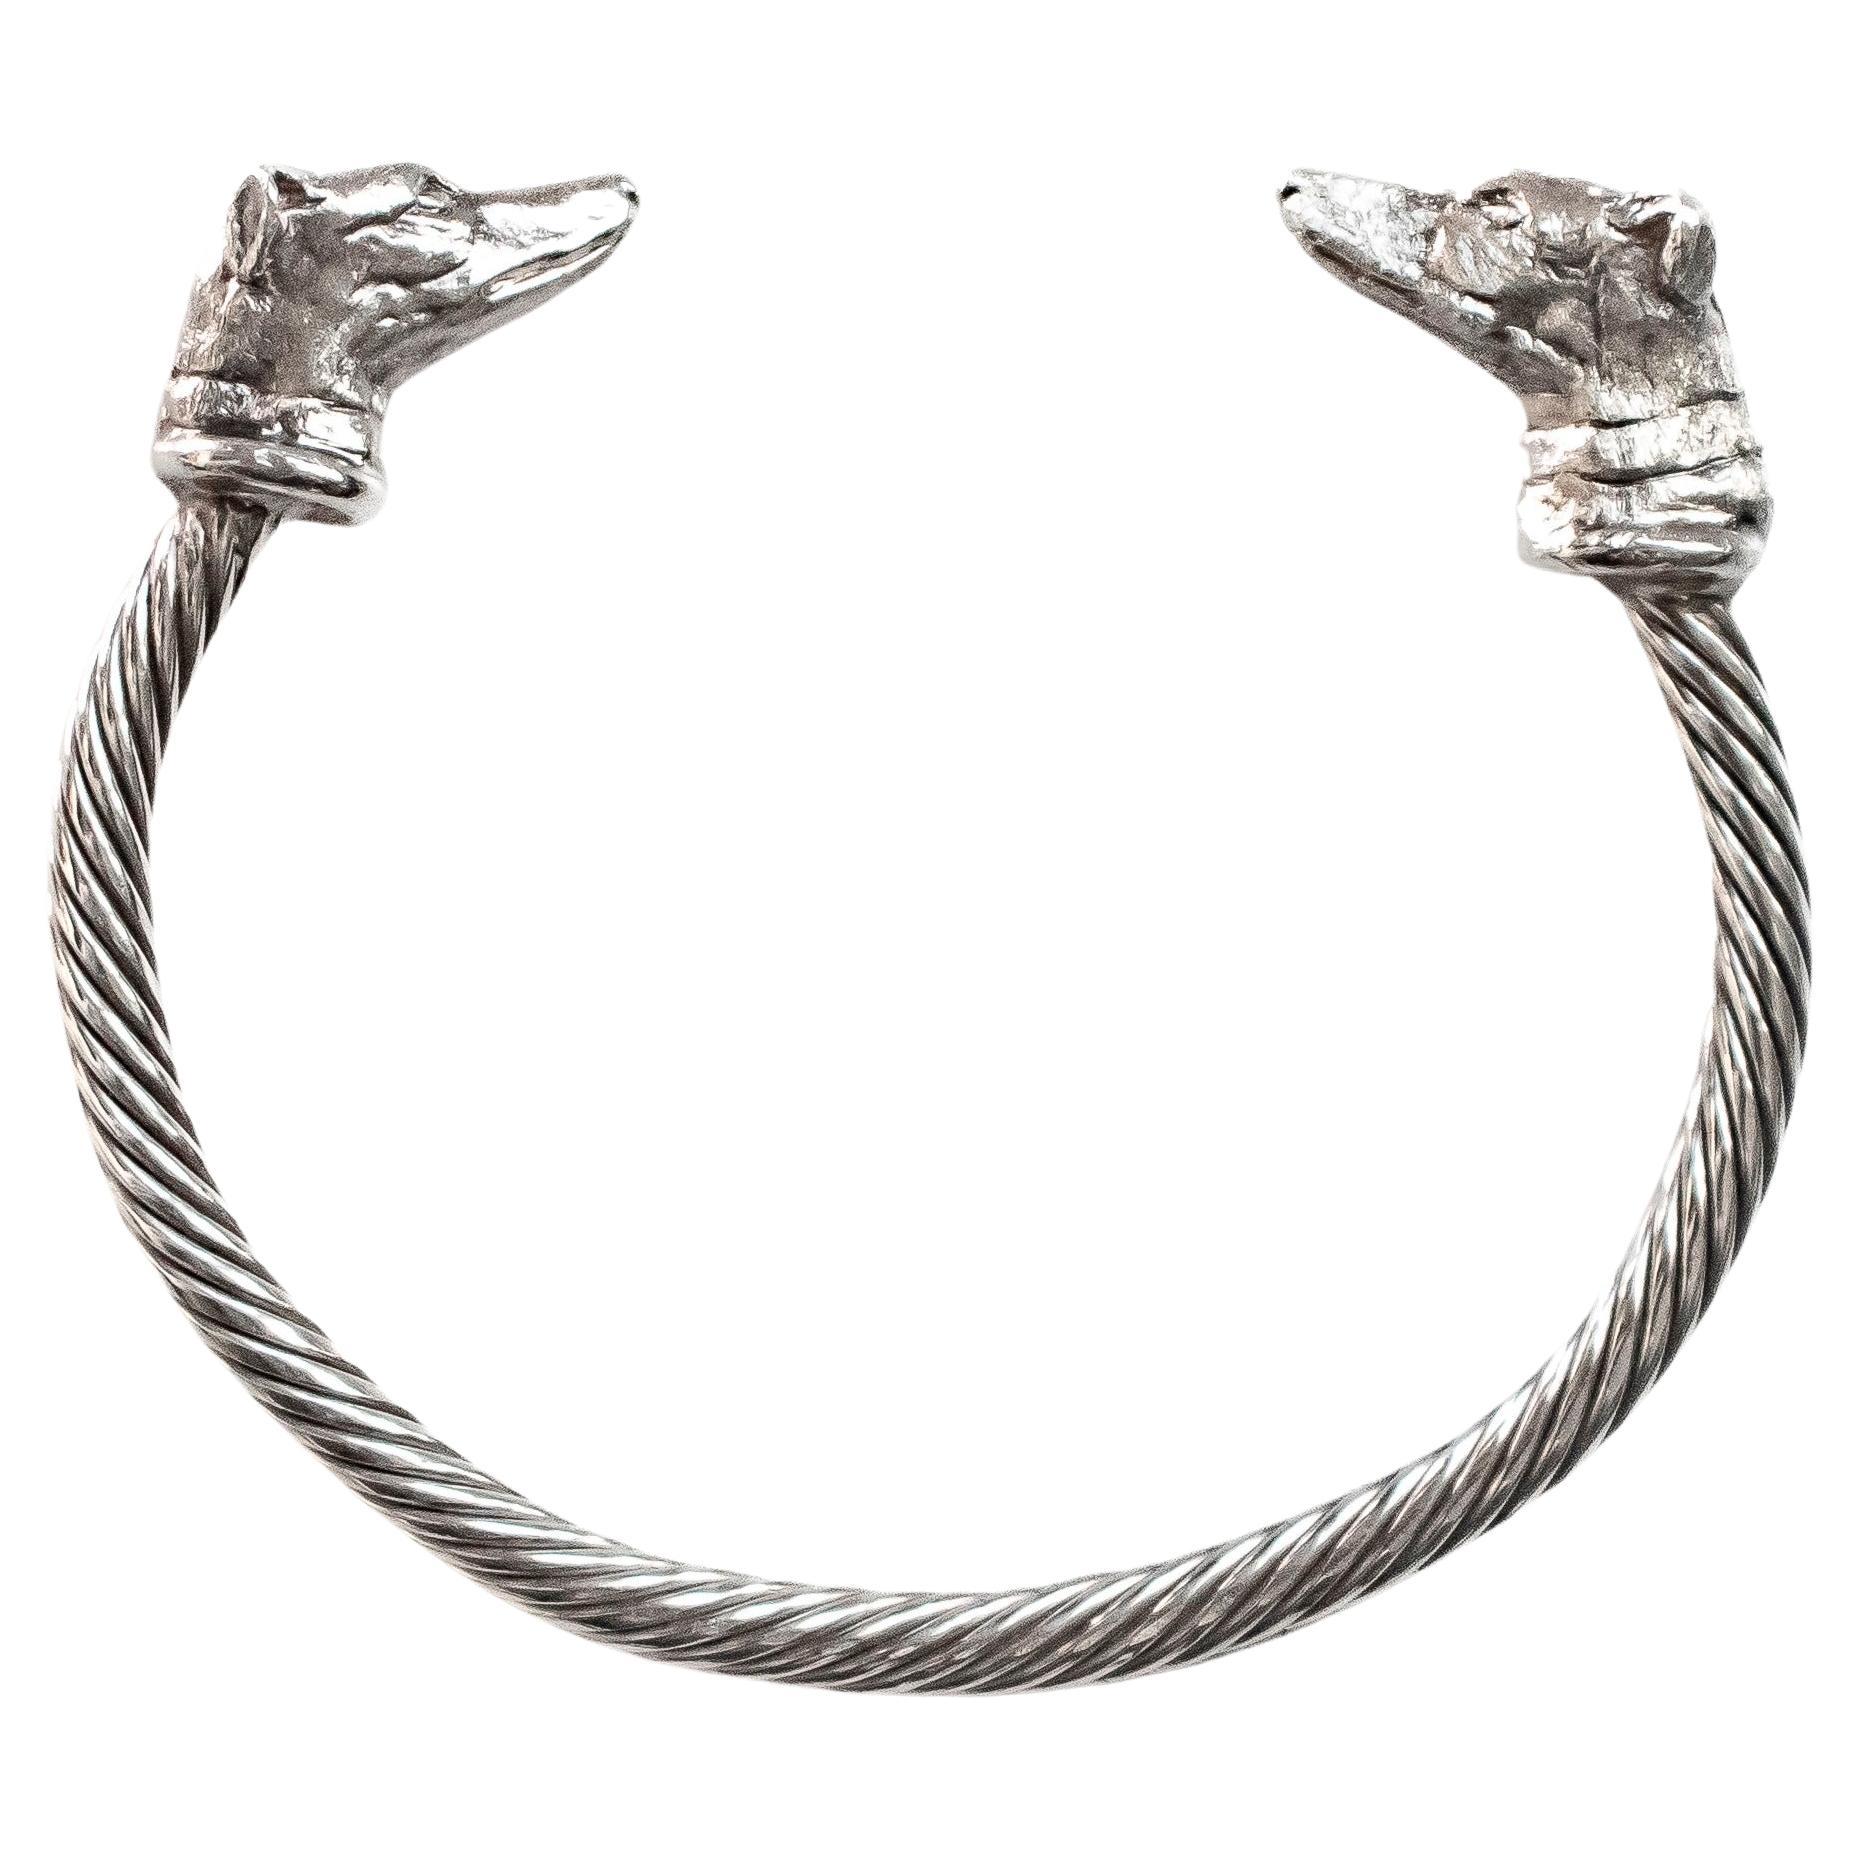 Paul Eaton Sculpted Greyhound Heads on Sterling Silver Twisted Bangle Bracelet For Sale